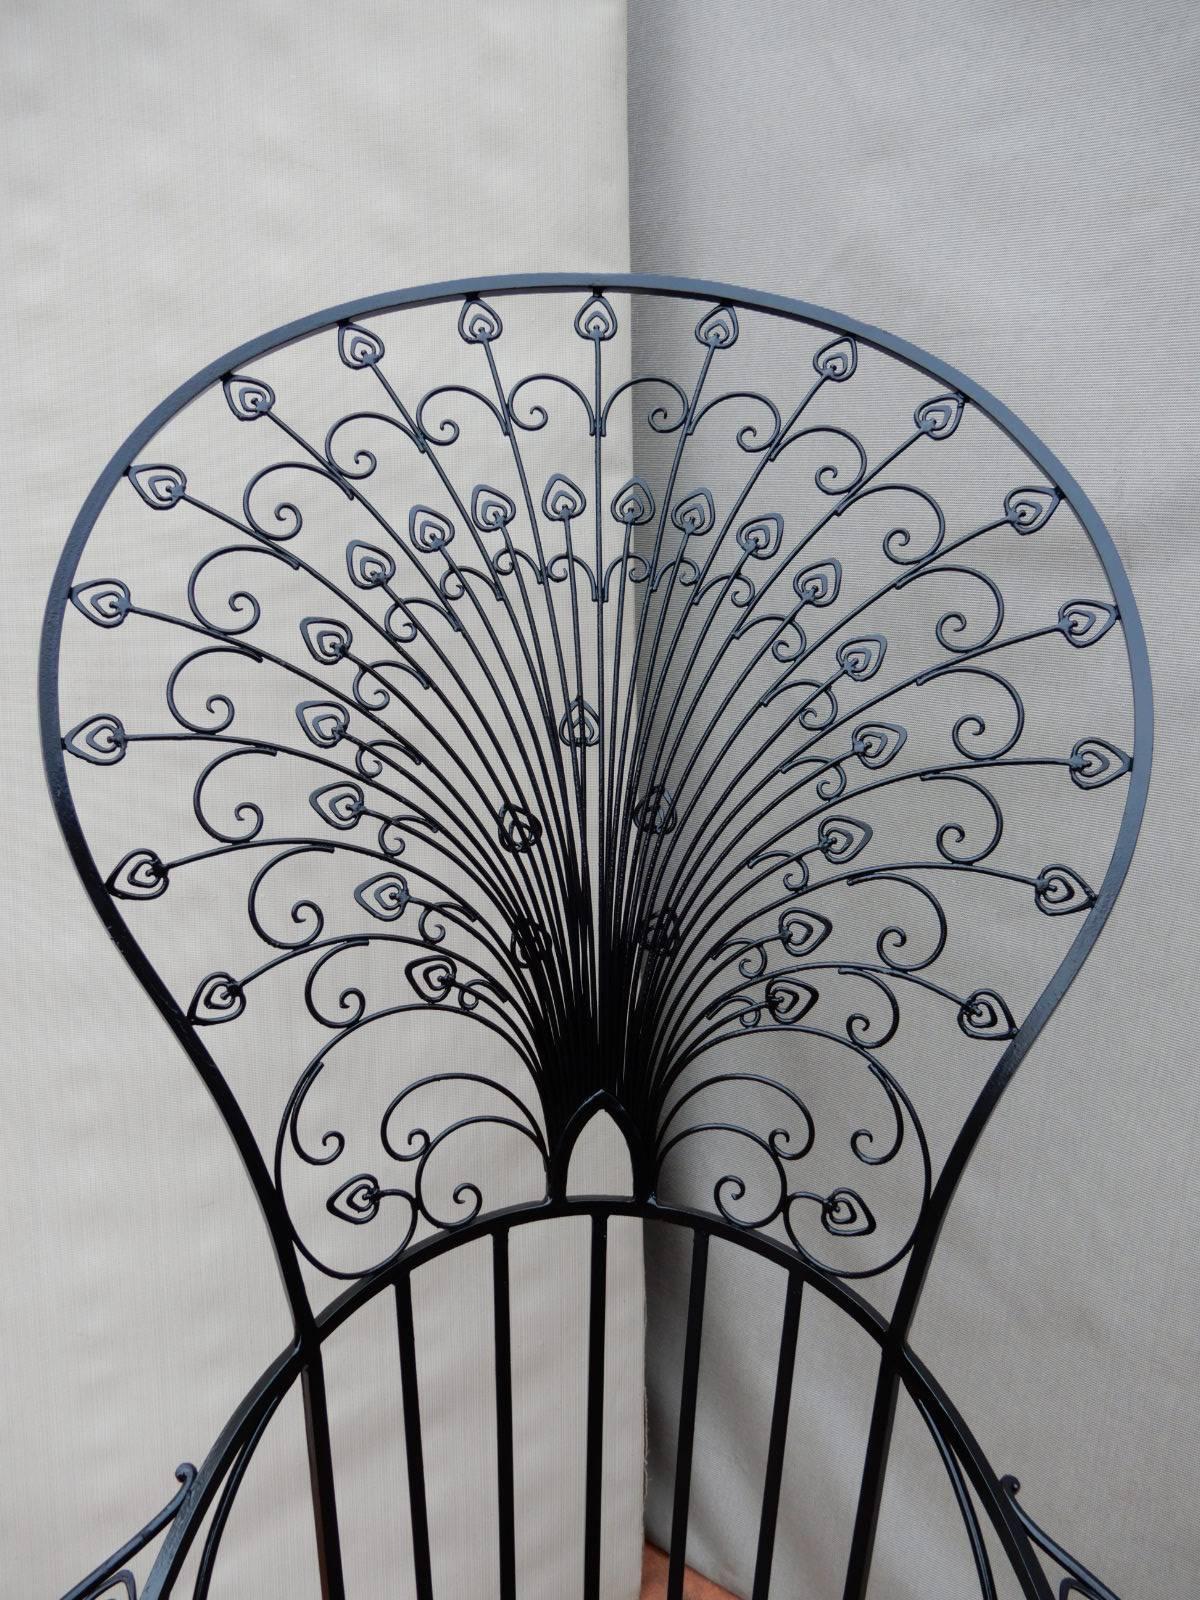 An ornate wrought iron peacock chair. A recently discovered ad shows the chair to be made by Florentine Craft Studio chief competitors to Salterini. The peacock chair has just been sandblasted and painted black. It is in excellent condition.